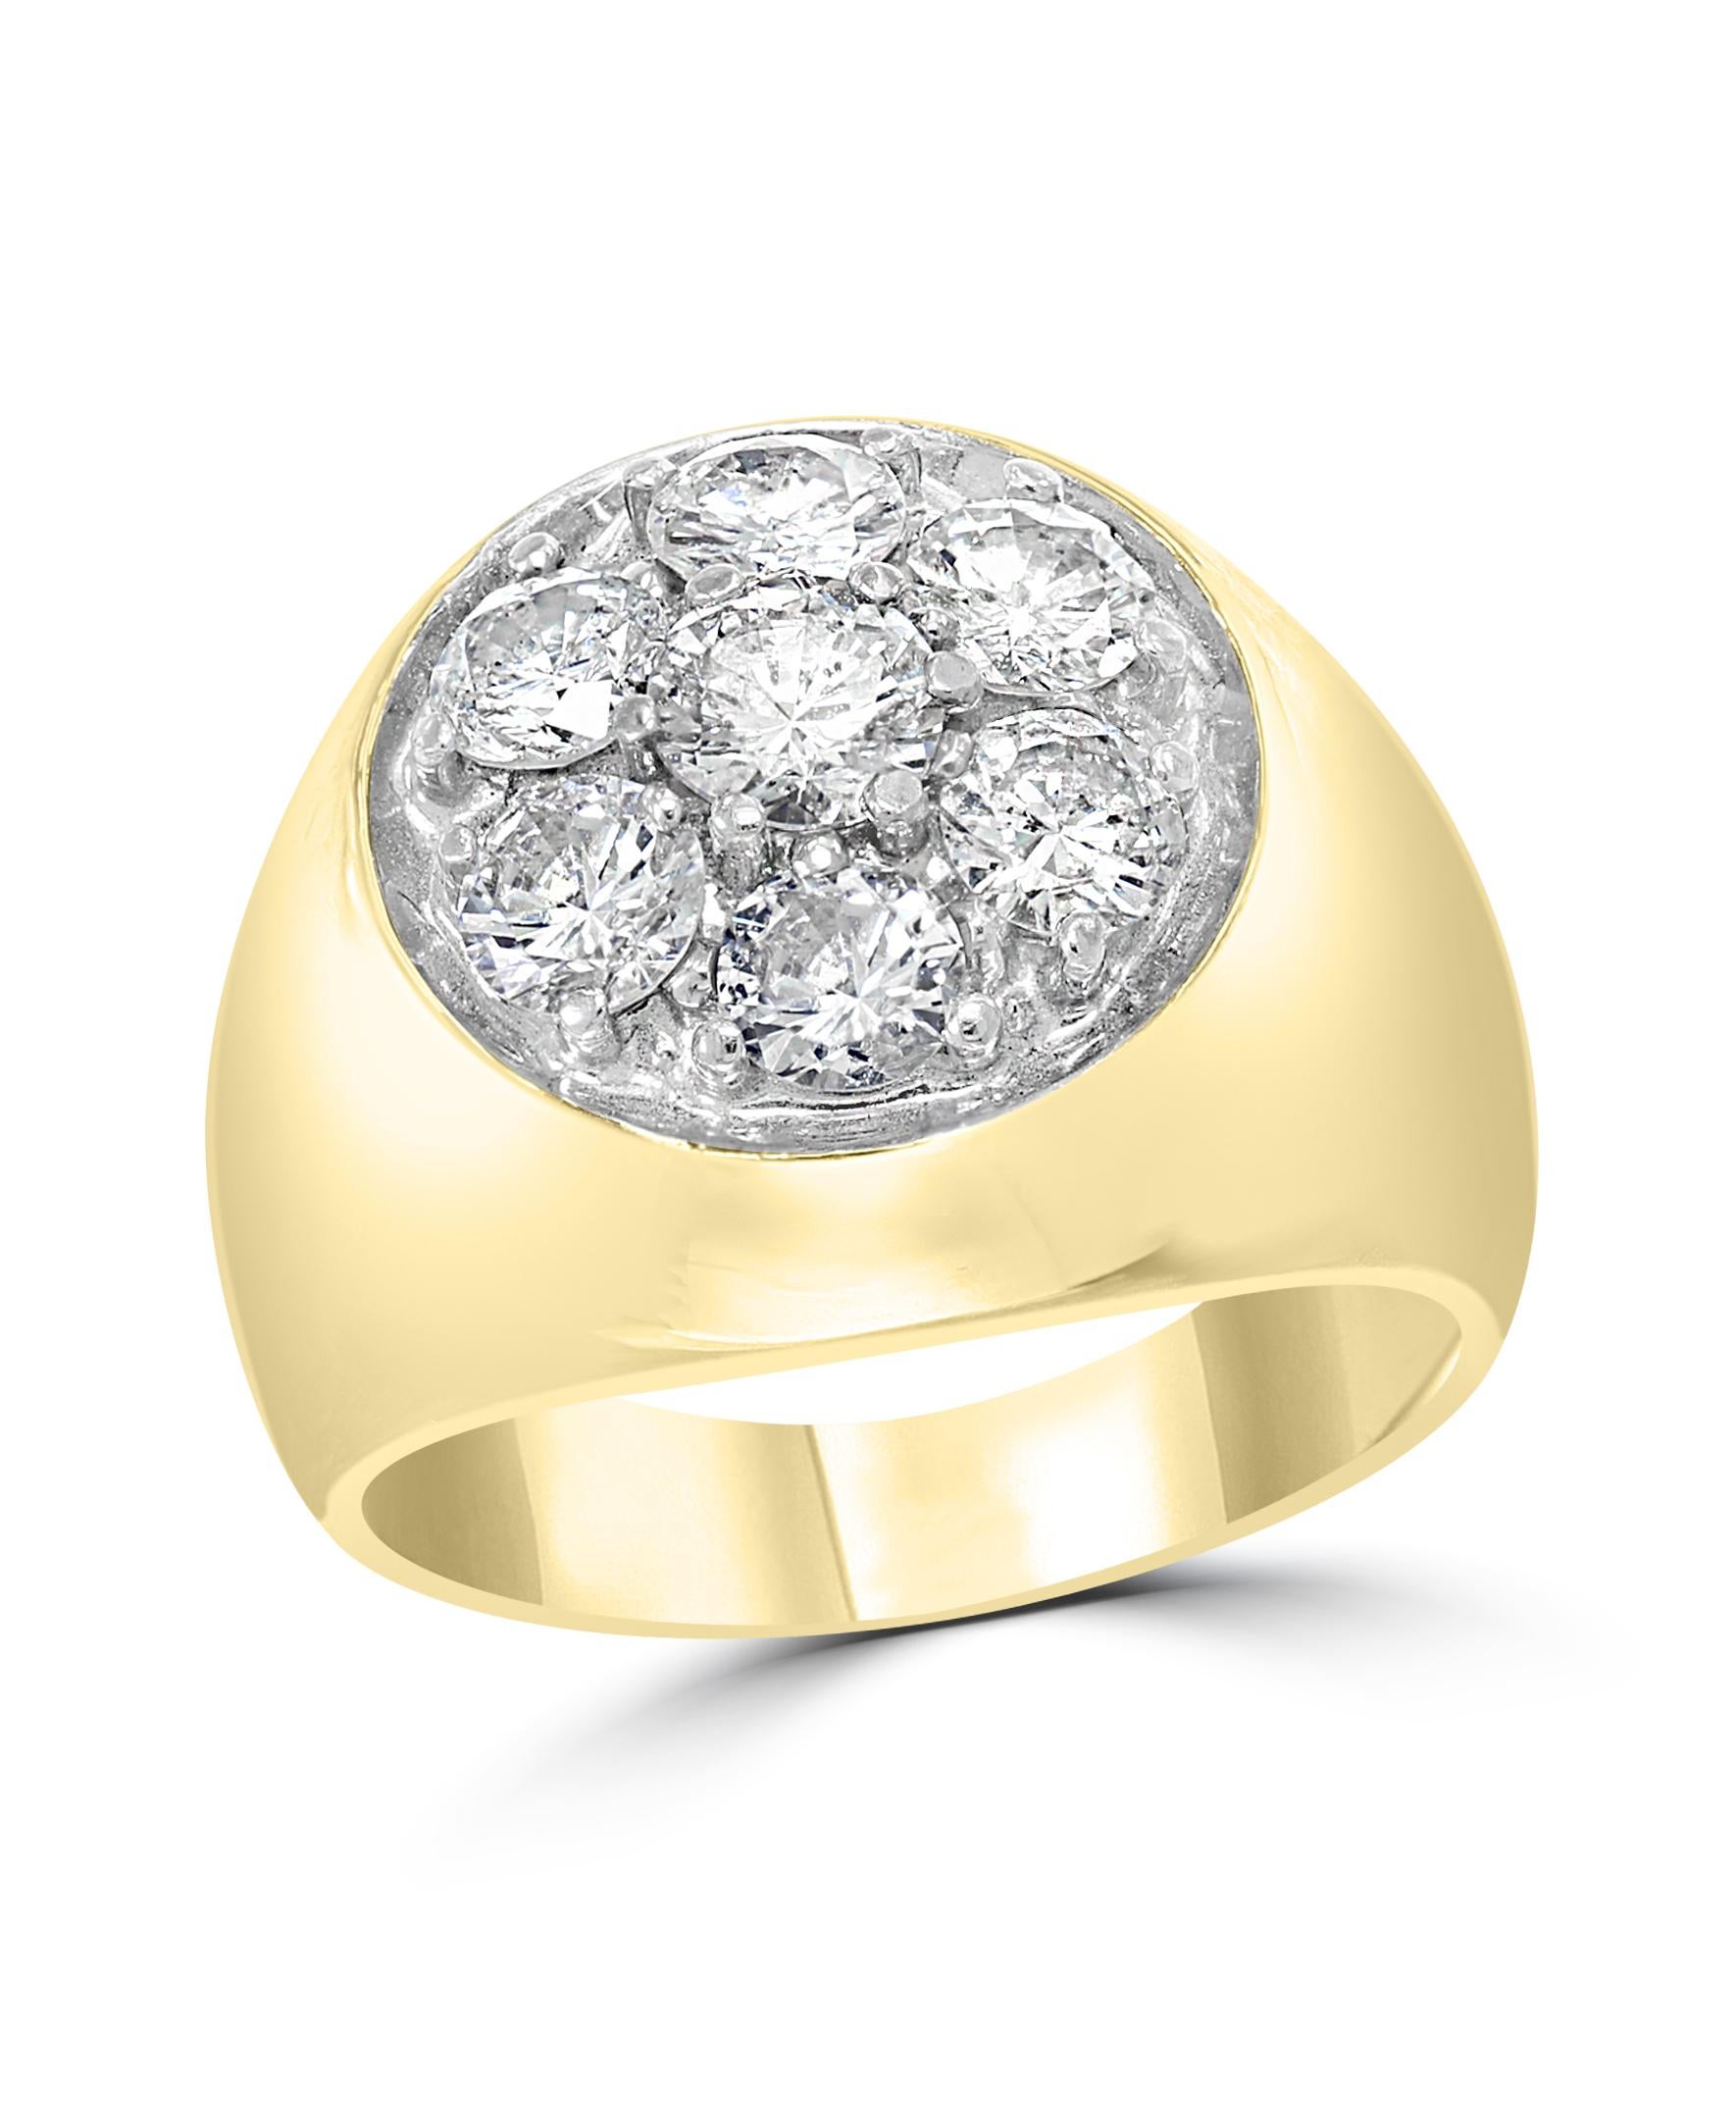 14k gold ring with 7 diamonds